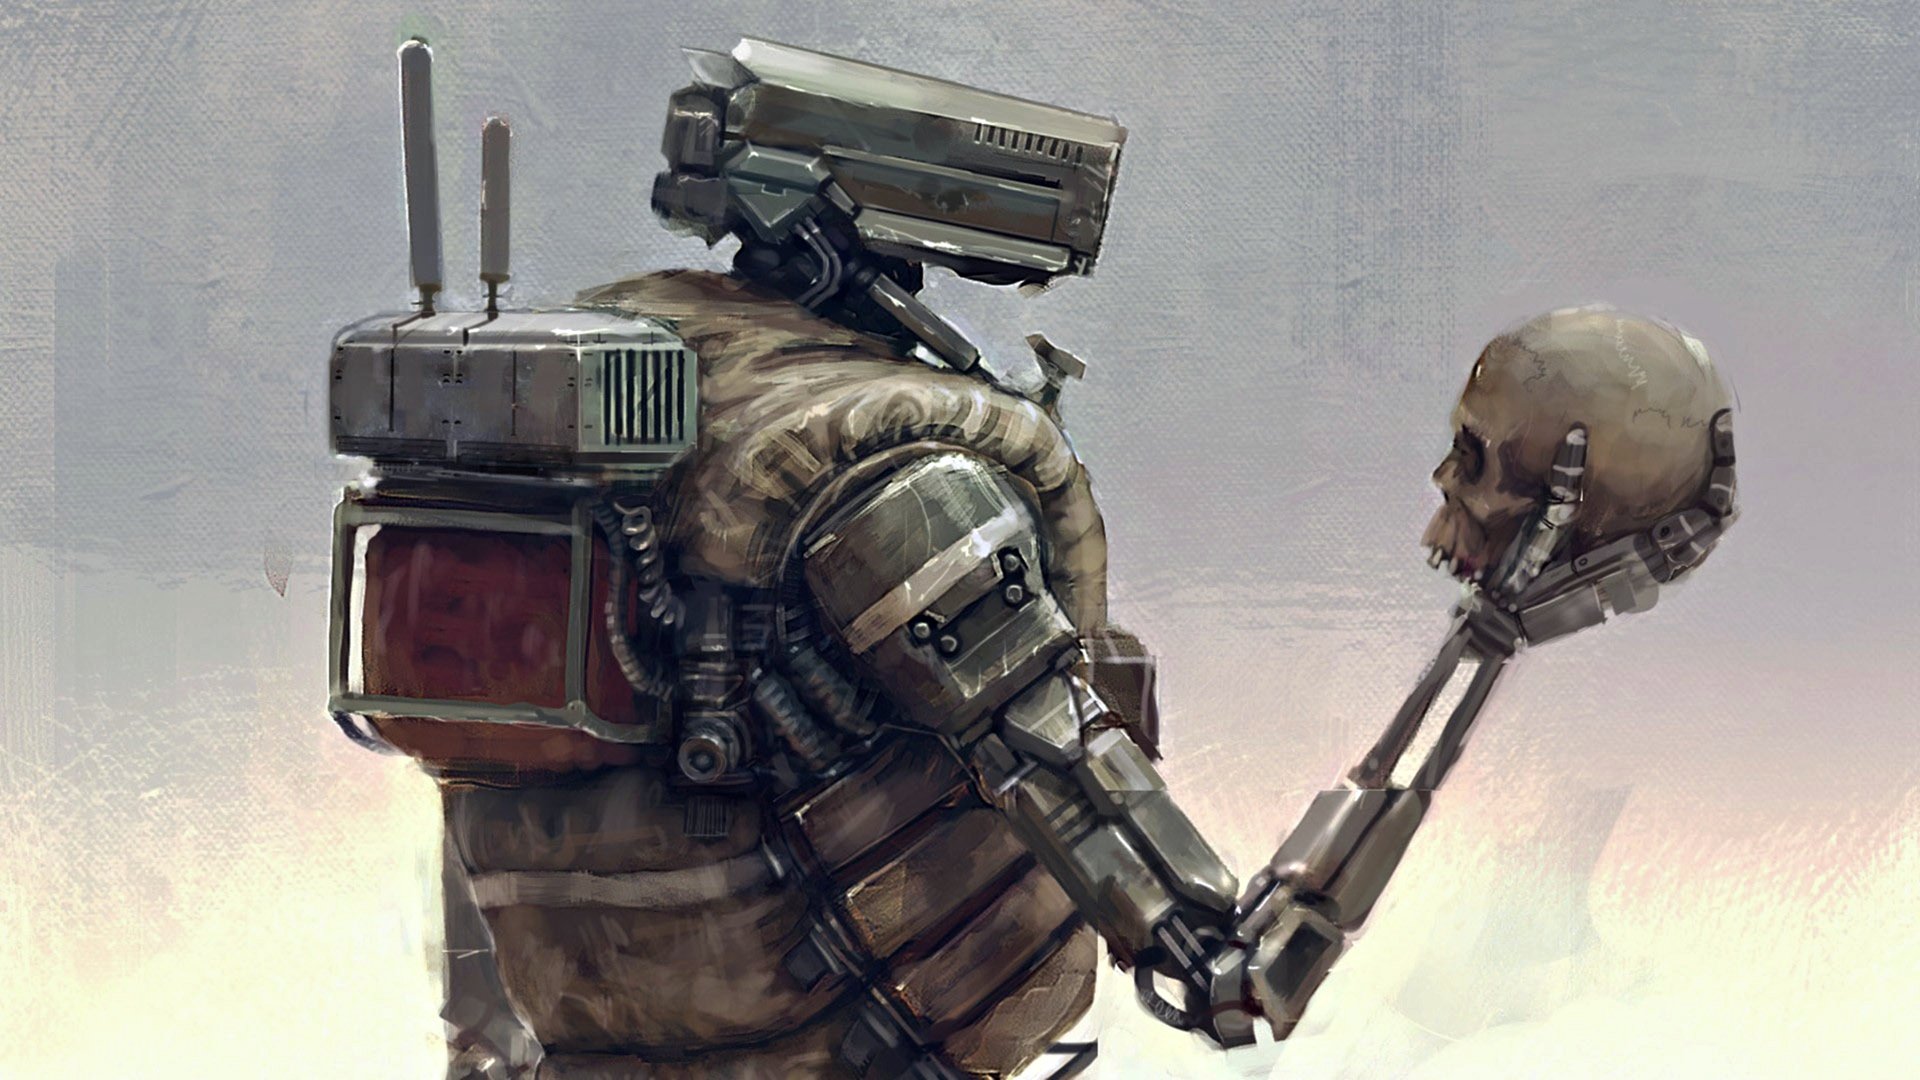 194 4k Ultra Hd Robot Wallpapers Background Images Wallpaper Abyss